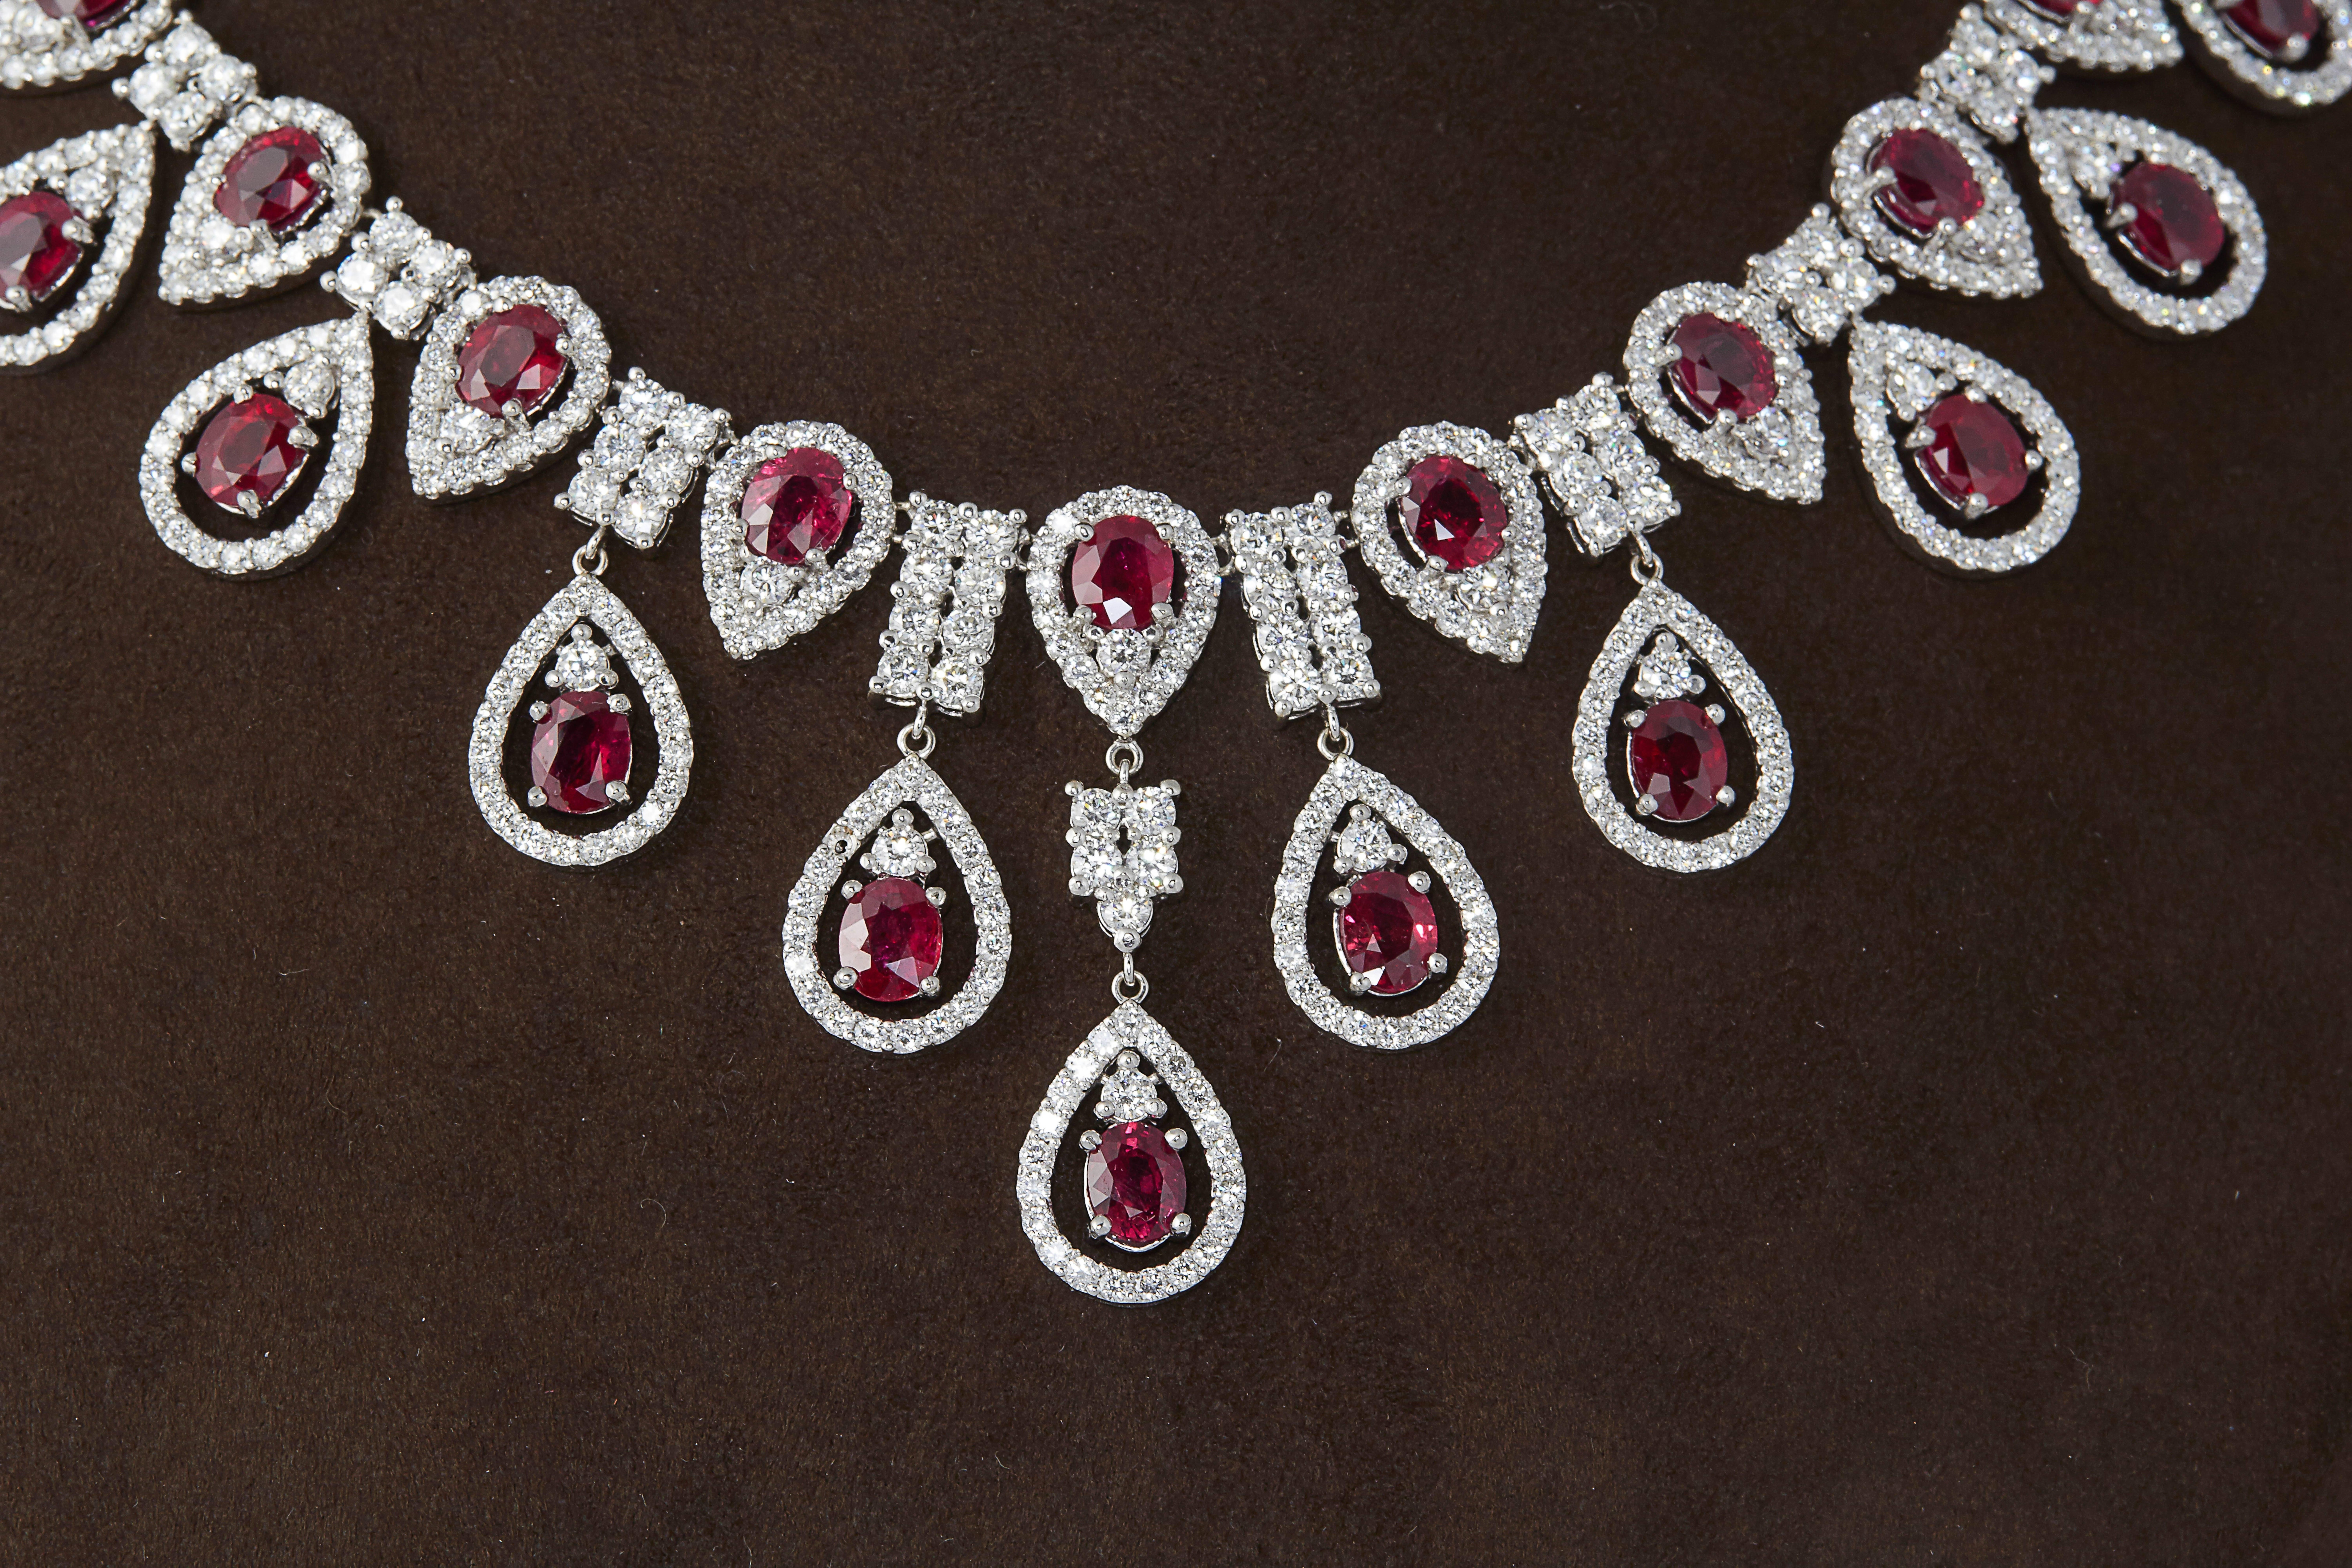 

A beautiful piece!

38.61 carats of fine color and clarity oval shaped Ruby

26.32 carats of F/G color VS clarity round brilliant cut diamonds

14k white gold

Approximately 18 inches in length, but can easily be adjusted. 